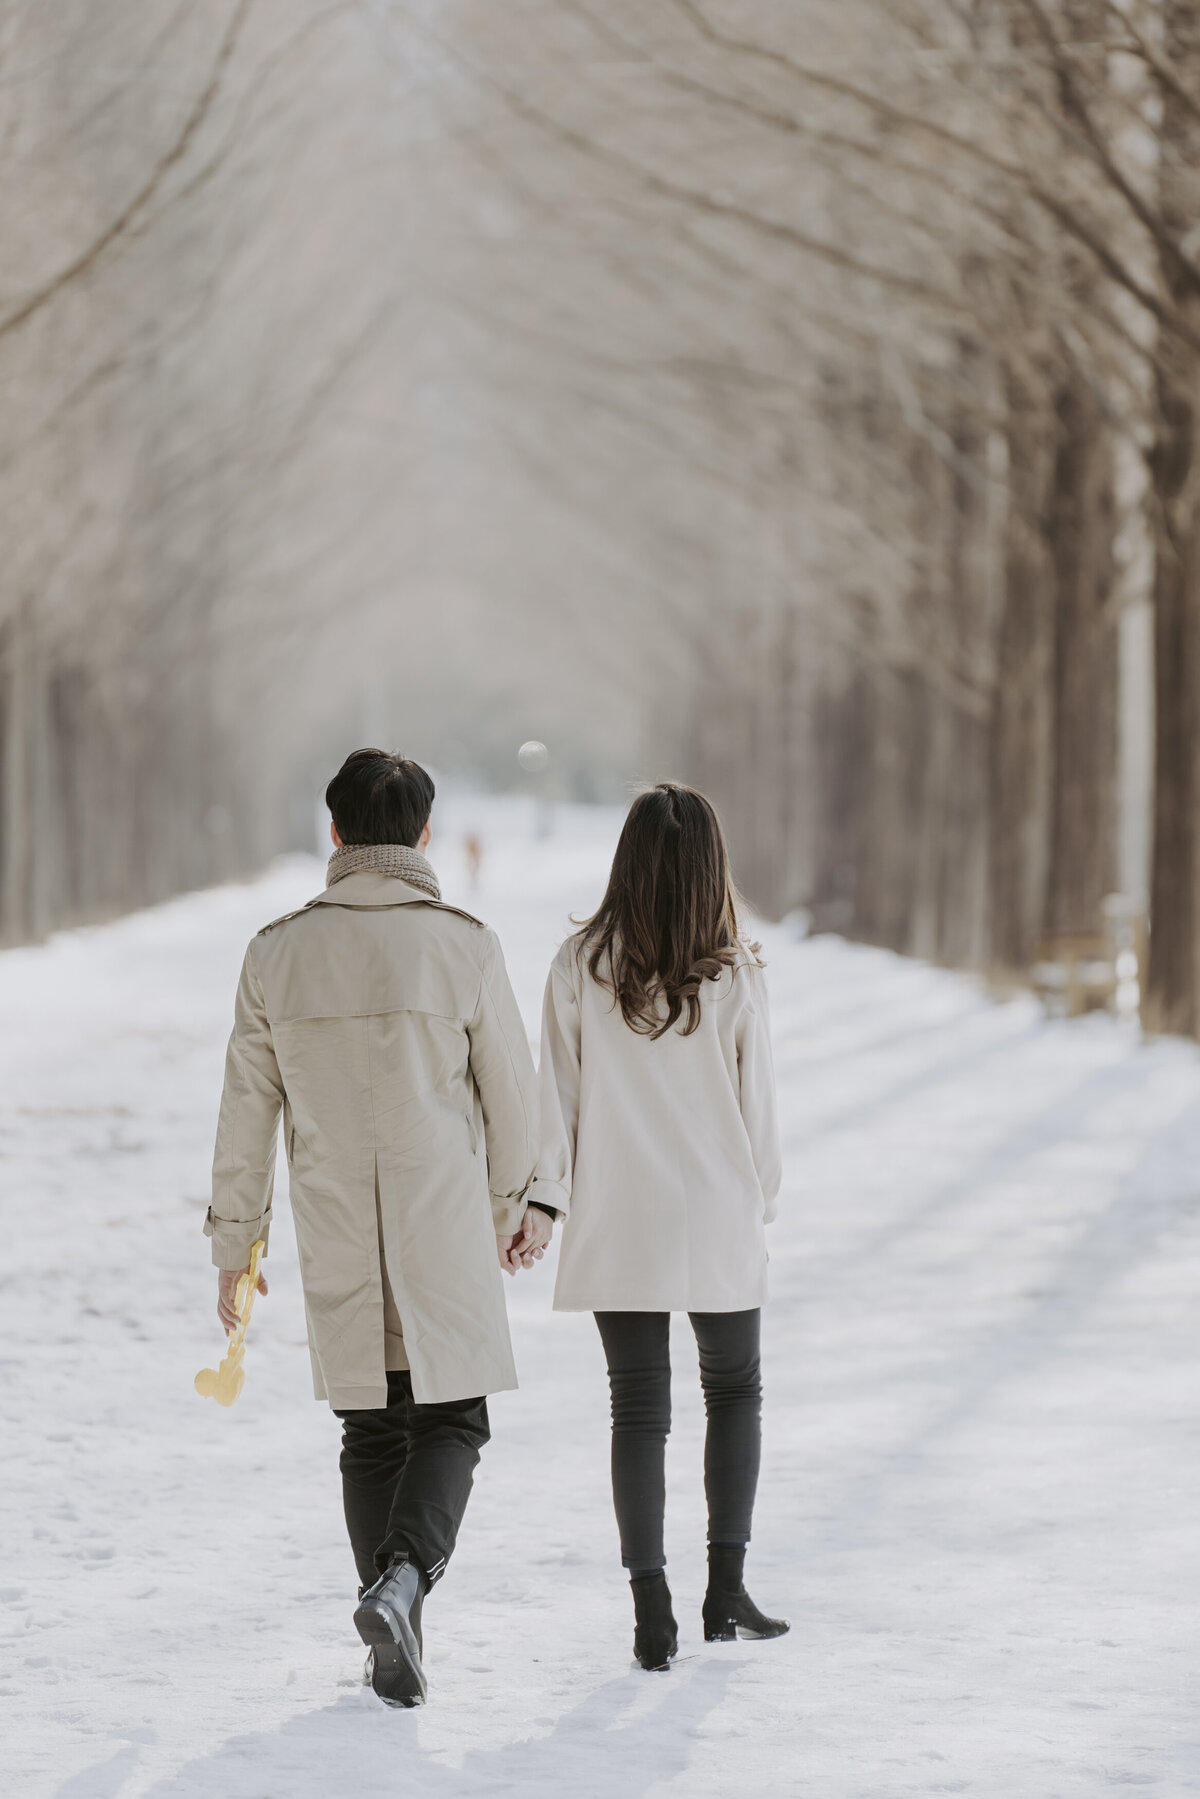 the couple hold hands while walking on a snow road in damyang